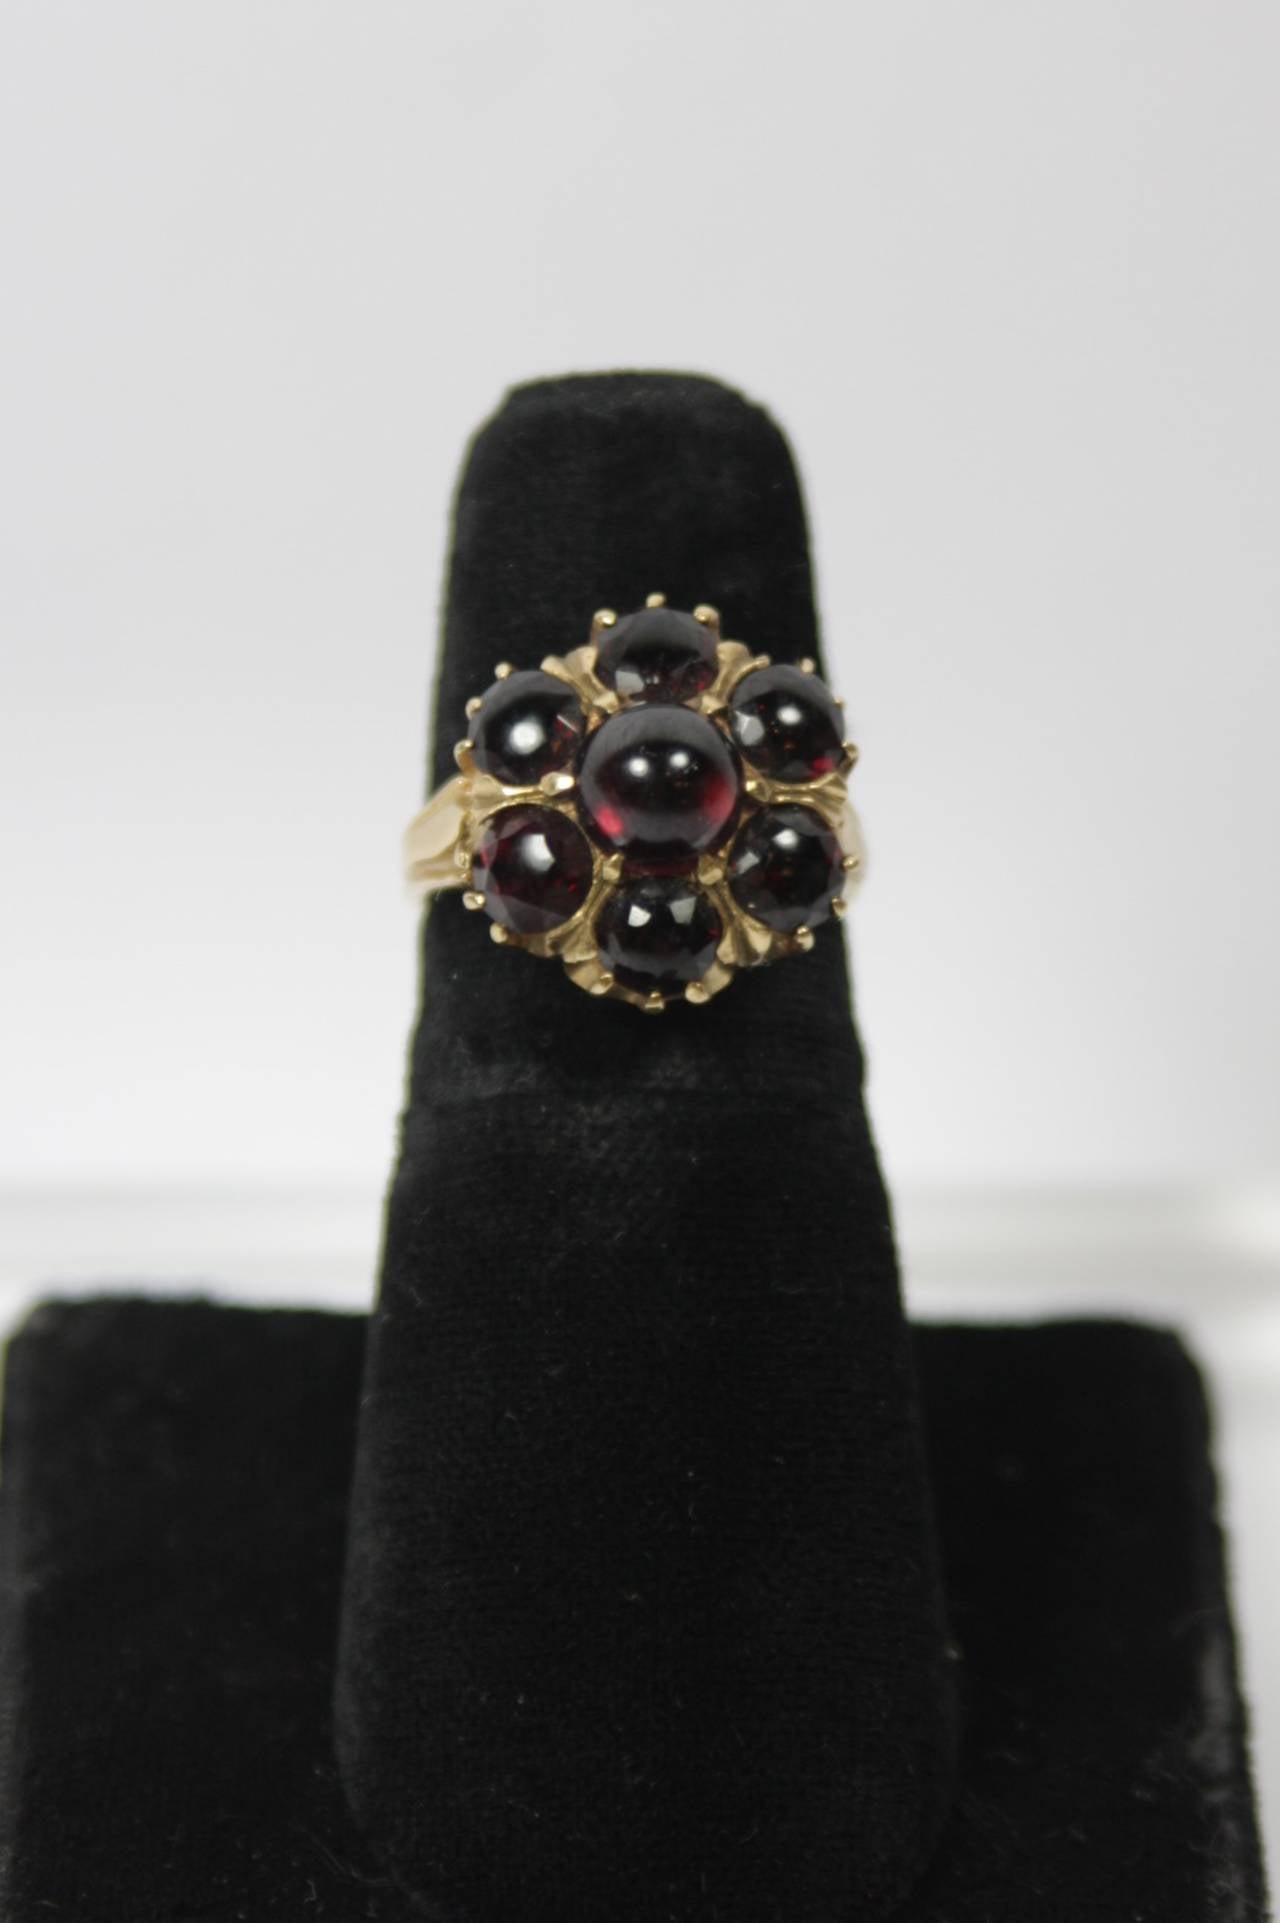 This Garnet ring features seven Cabochon cut garnets set in 14KT gold. A stunning ring in excellent condition.

Specs: 
Garnet: 7 Cabochon cut
14KT Gold 
Measures: .5" Width across face
Approximately size: 6.5